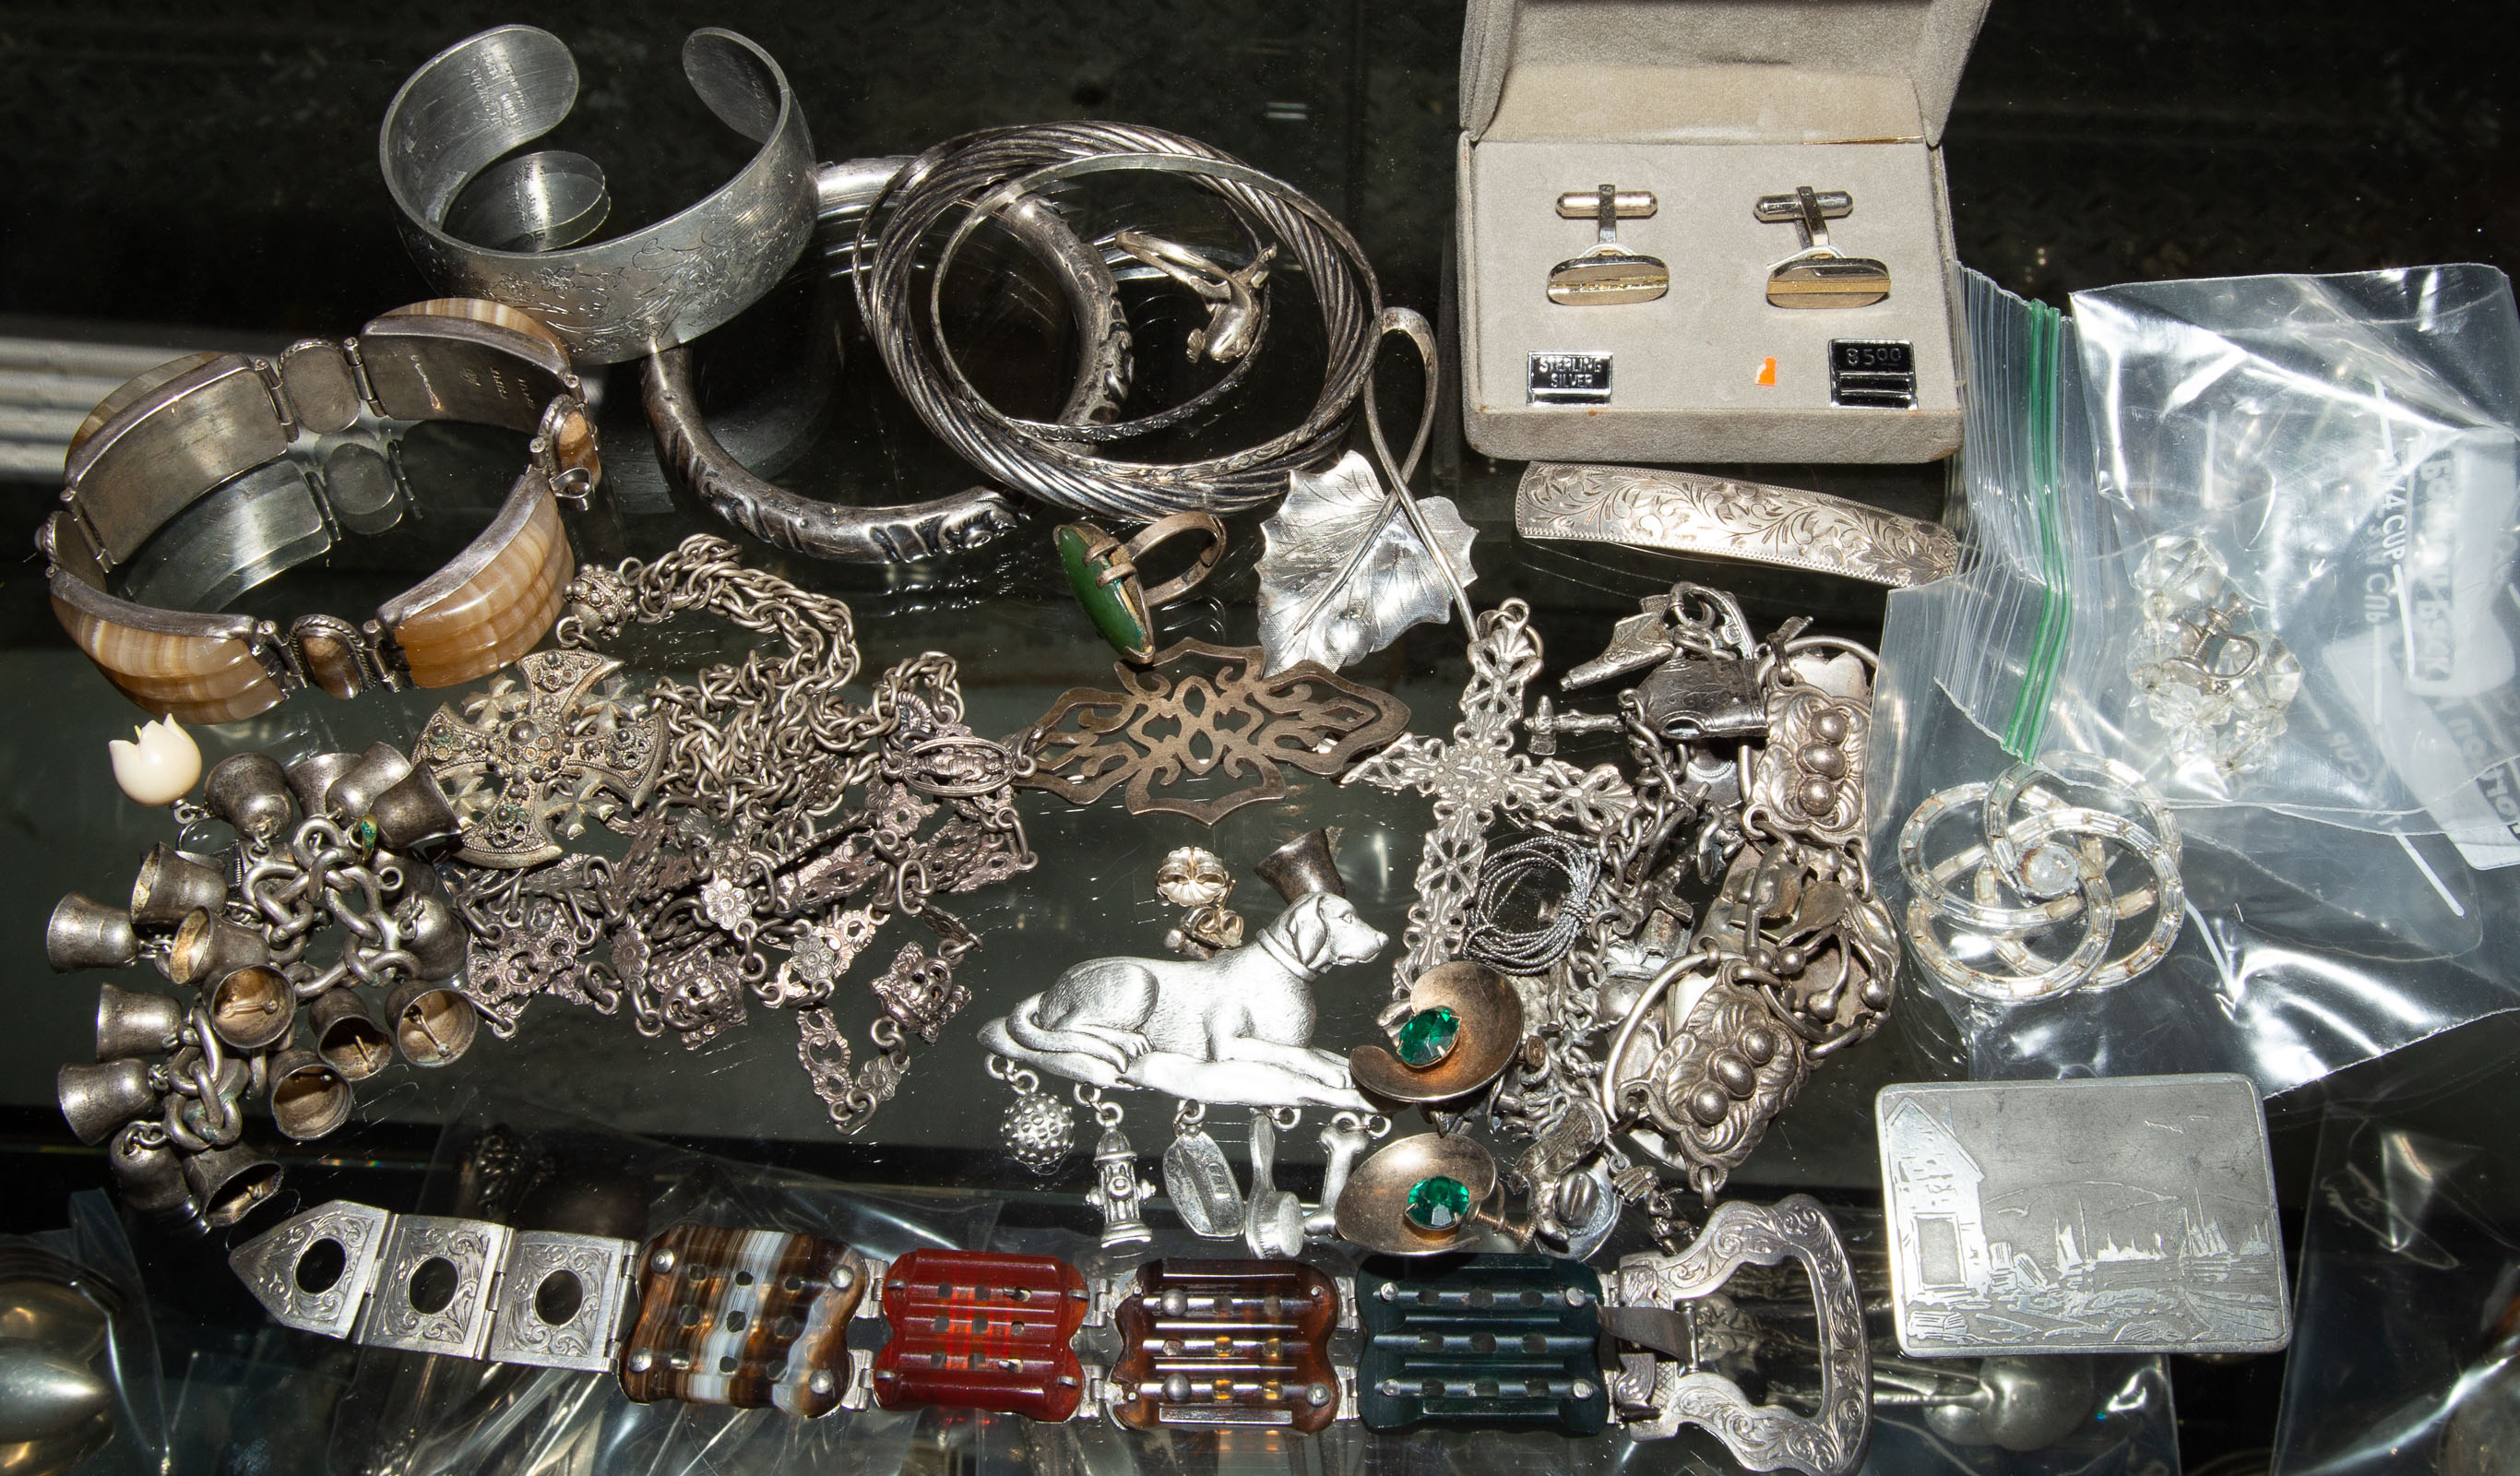 COLLECTION OF STERLING SILVER JEWELRY